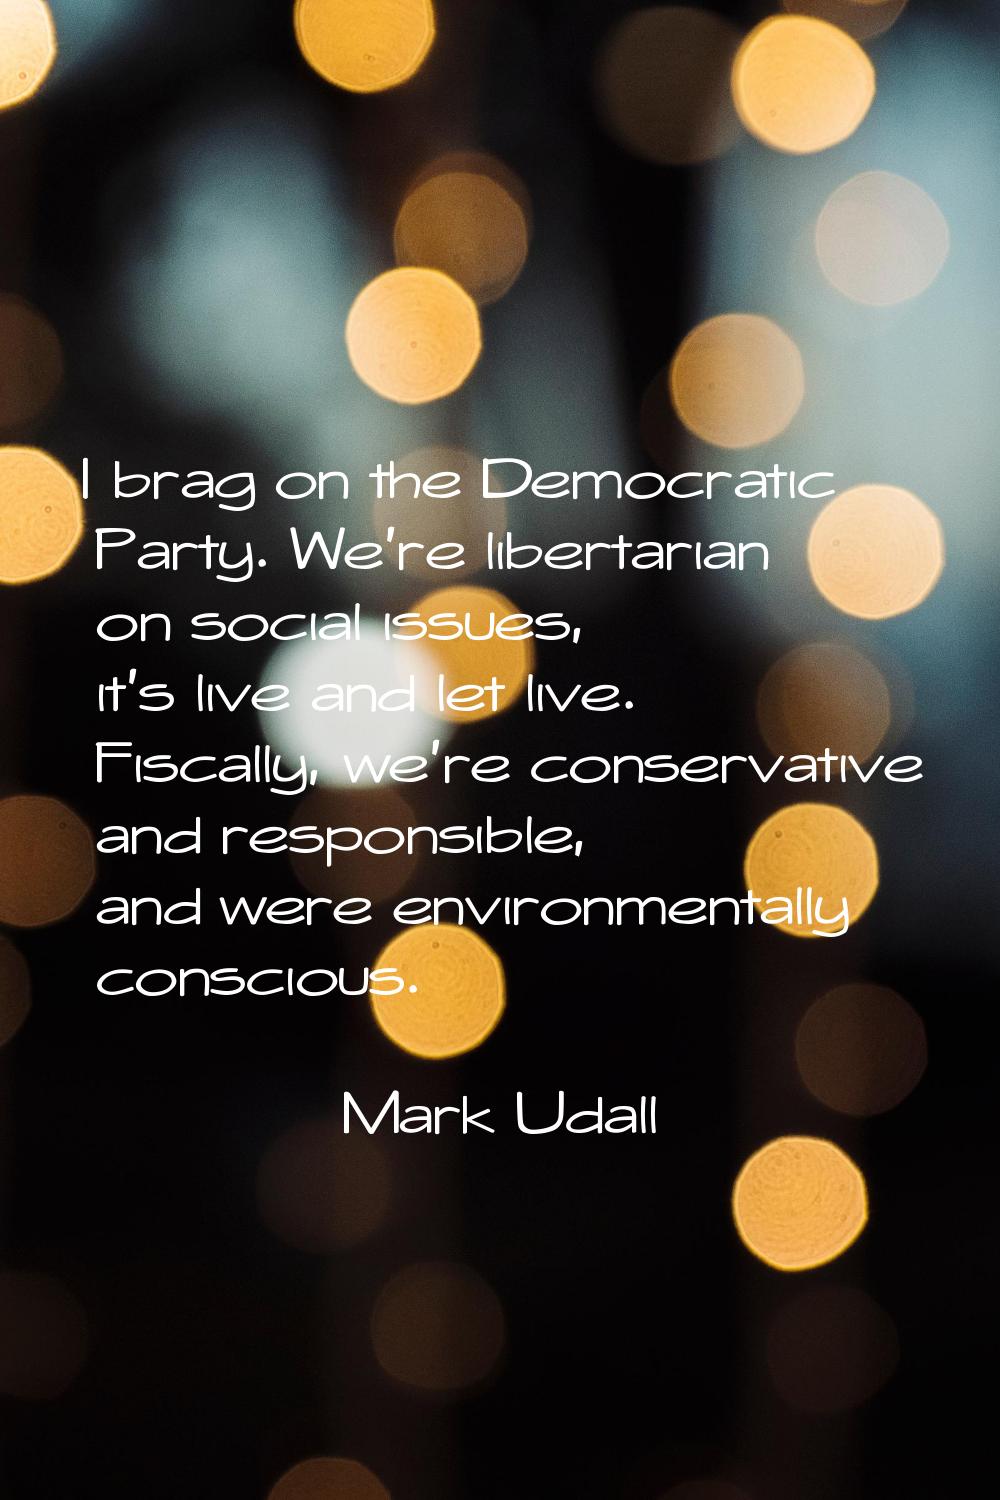 I brag on the Democratic Party. We're libertarian on social issues, it's live and let live. Fiscall